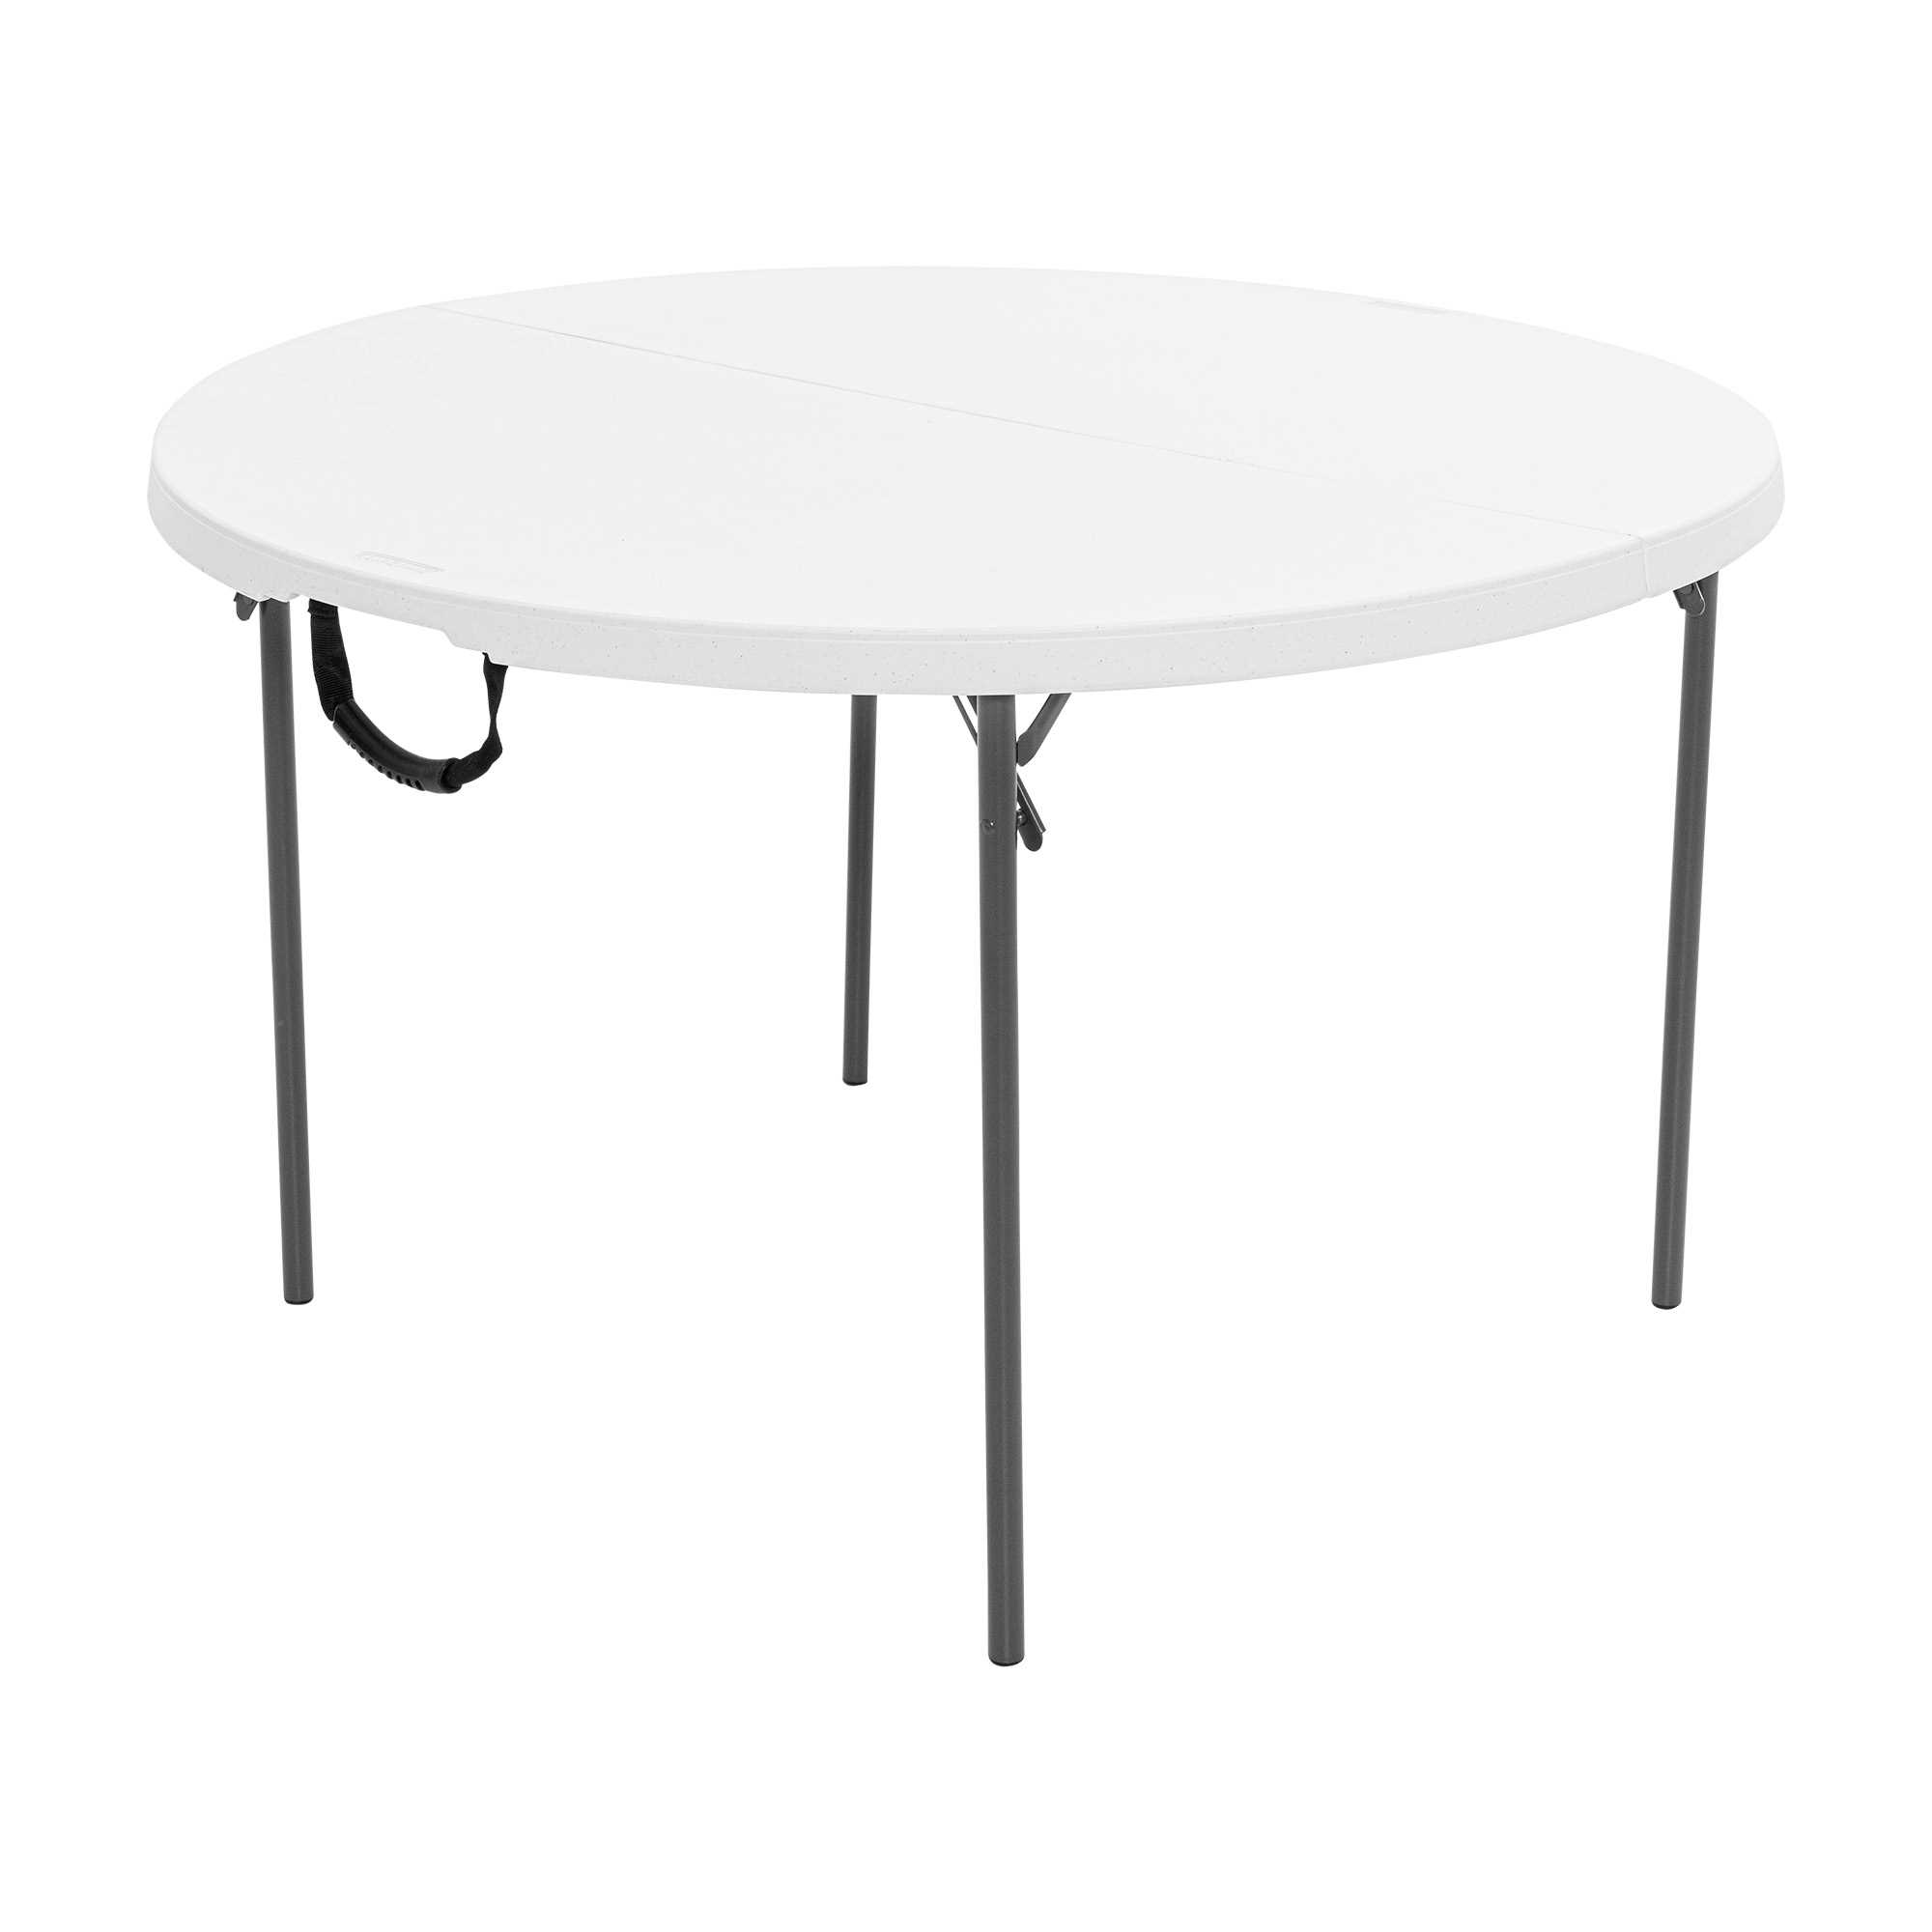 48-inch Round FIH folding table 122cm Dia / 4-6 people / light commercial